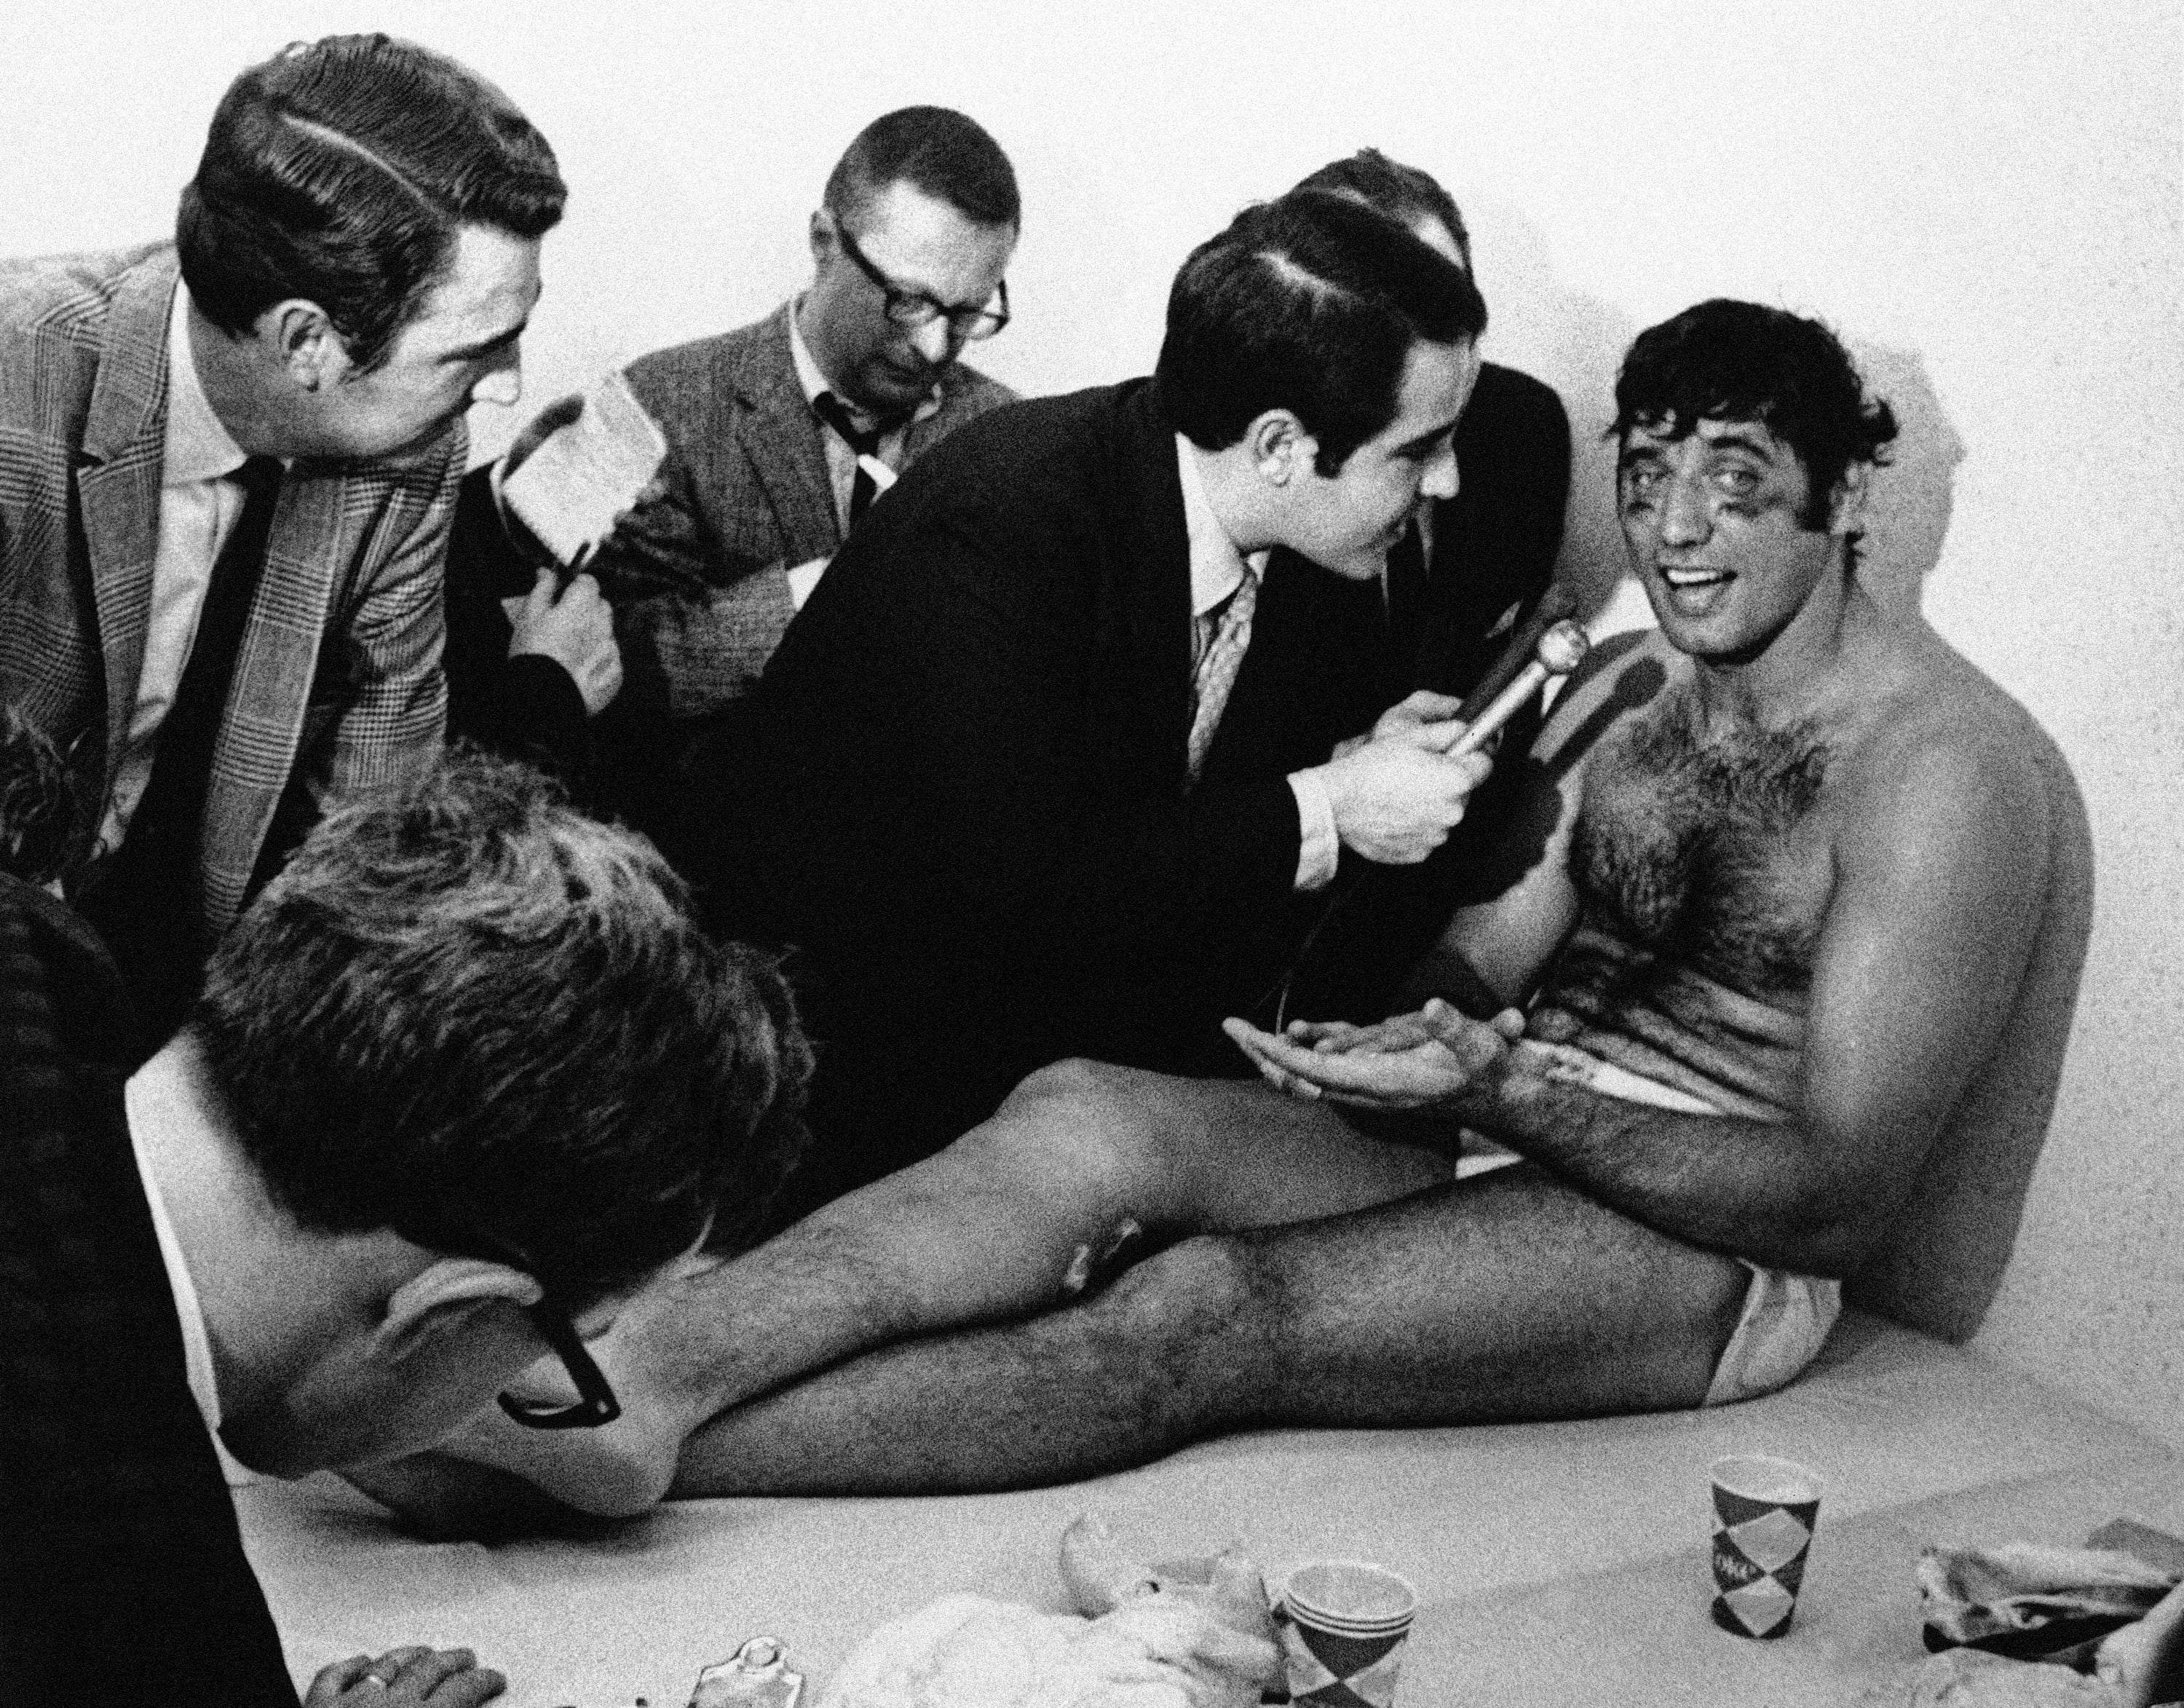 New York Jets quarterback Joe Namath speaks to reporters the day after beating the Baltimore Colts in Super Bowl III.